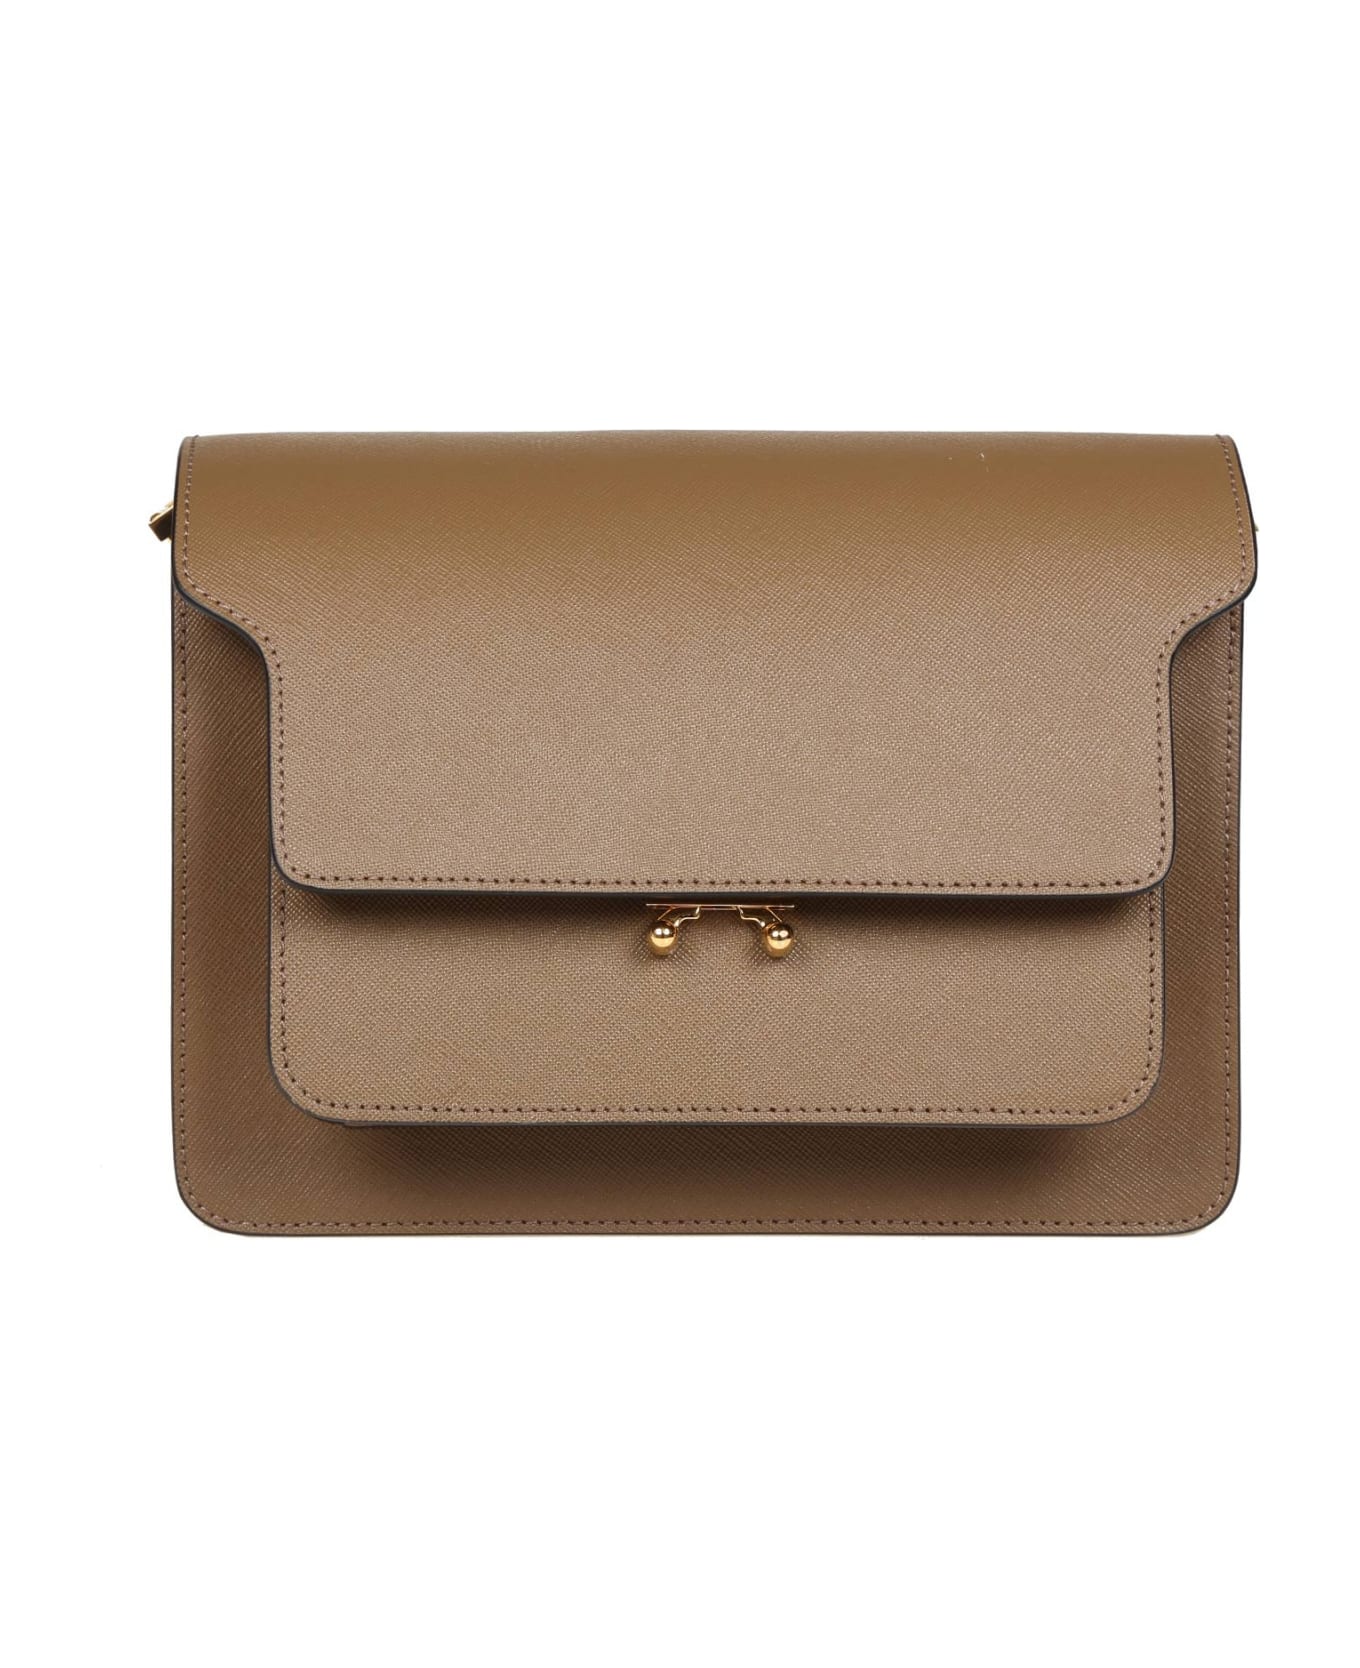 Marni Medium Trunk Bag In Taupe Color Leather - GREY